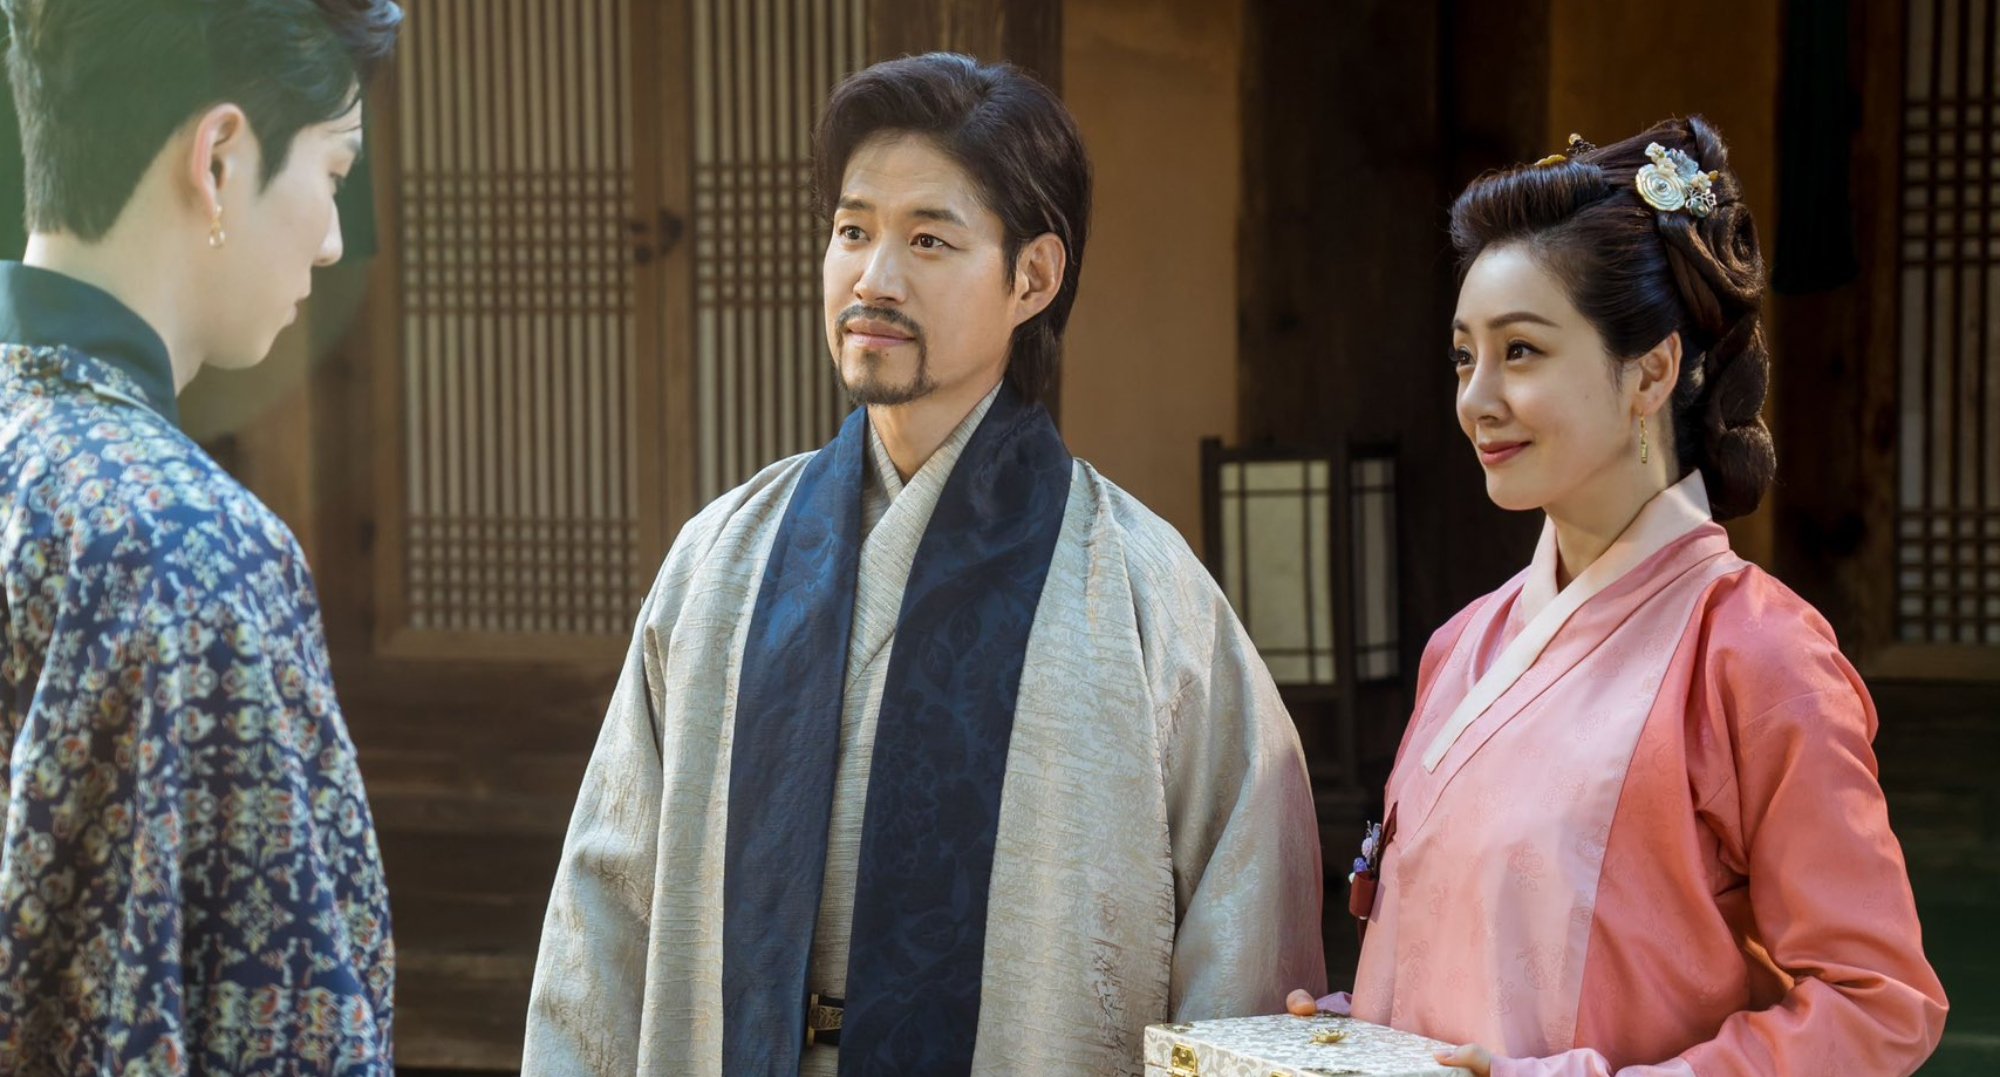 Maidservant Kim and Park Jin in 'Alchemy of Souls' Season 2.